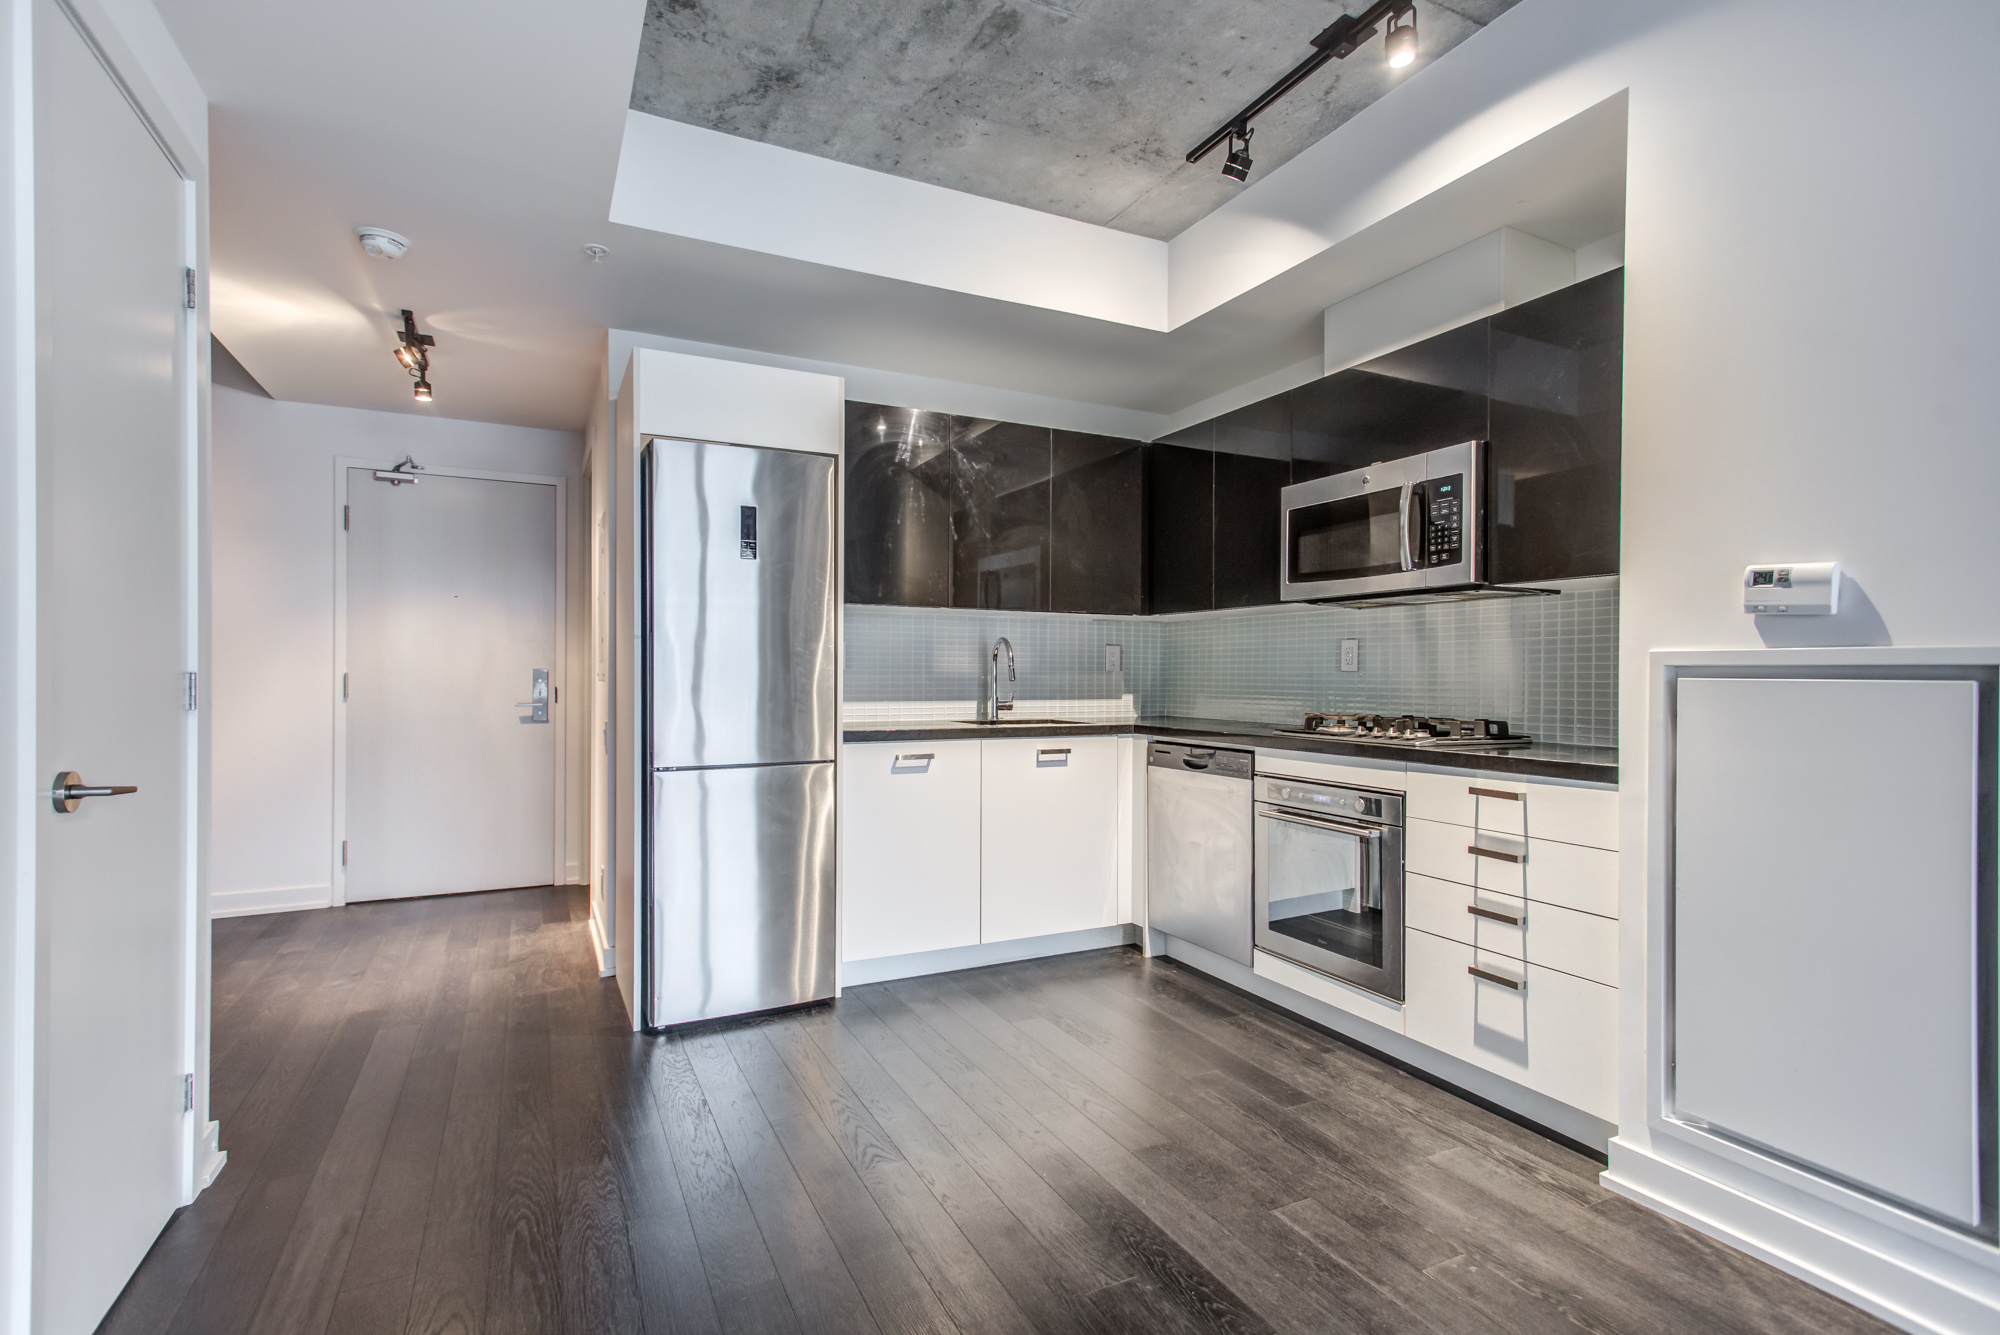 Condo with laminate floors and exposed concrete at 39 Brant St Unit 918, Brant Park Lofts, Queen West.